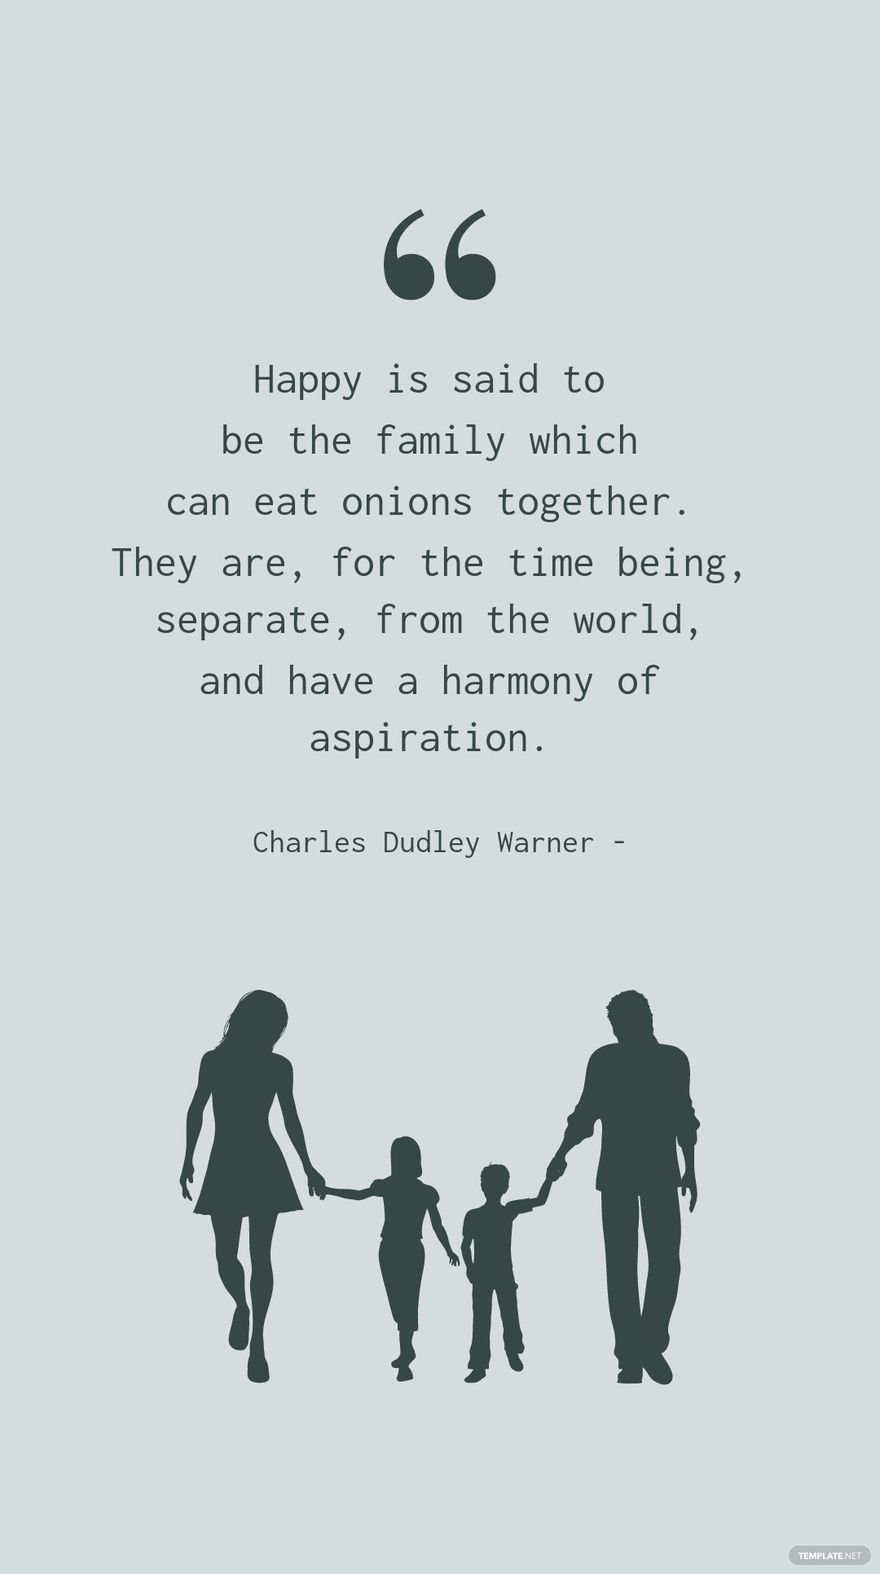 Charles Dudley Warner - Happy is said to be the family which can eat onions together. They are, for the time being, separate, from the world, and have a harmony of aspiration. in JPG